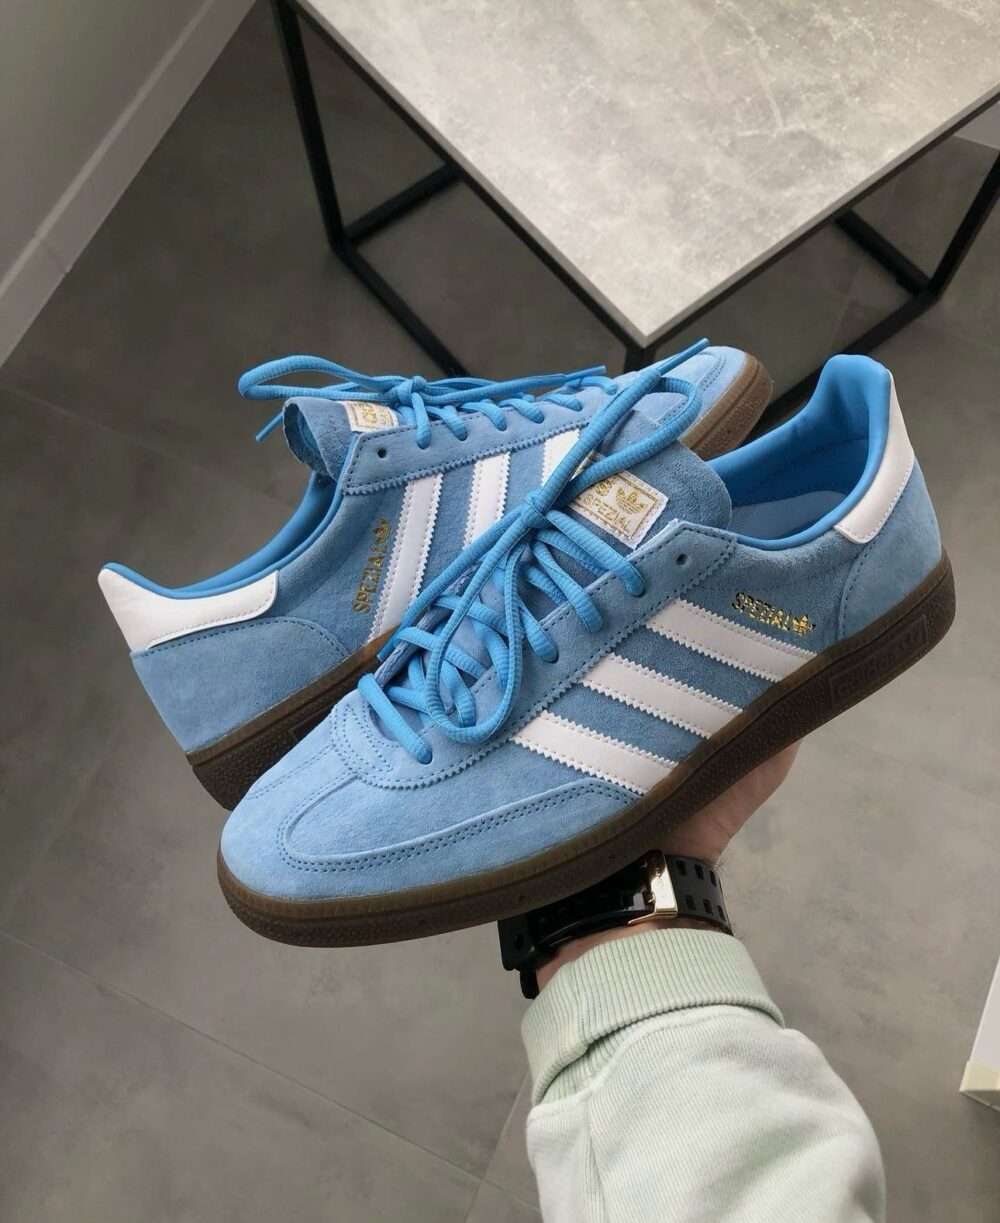 Buy First Copy Adidas Spezial Light Blue Shoes Online India